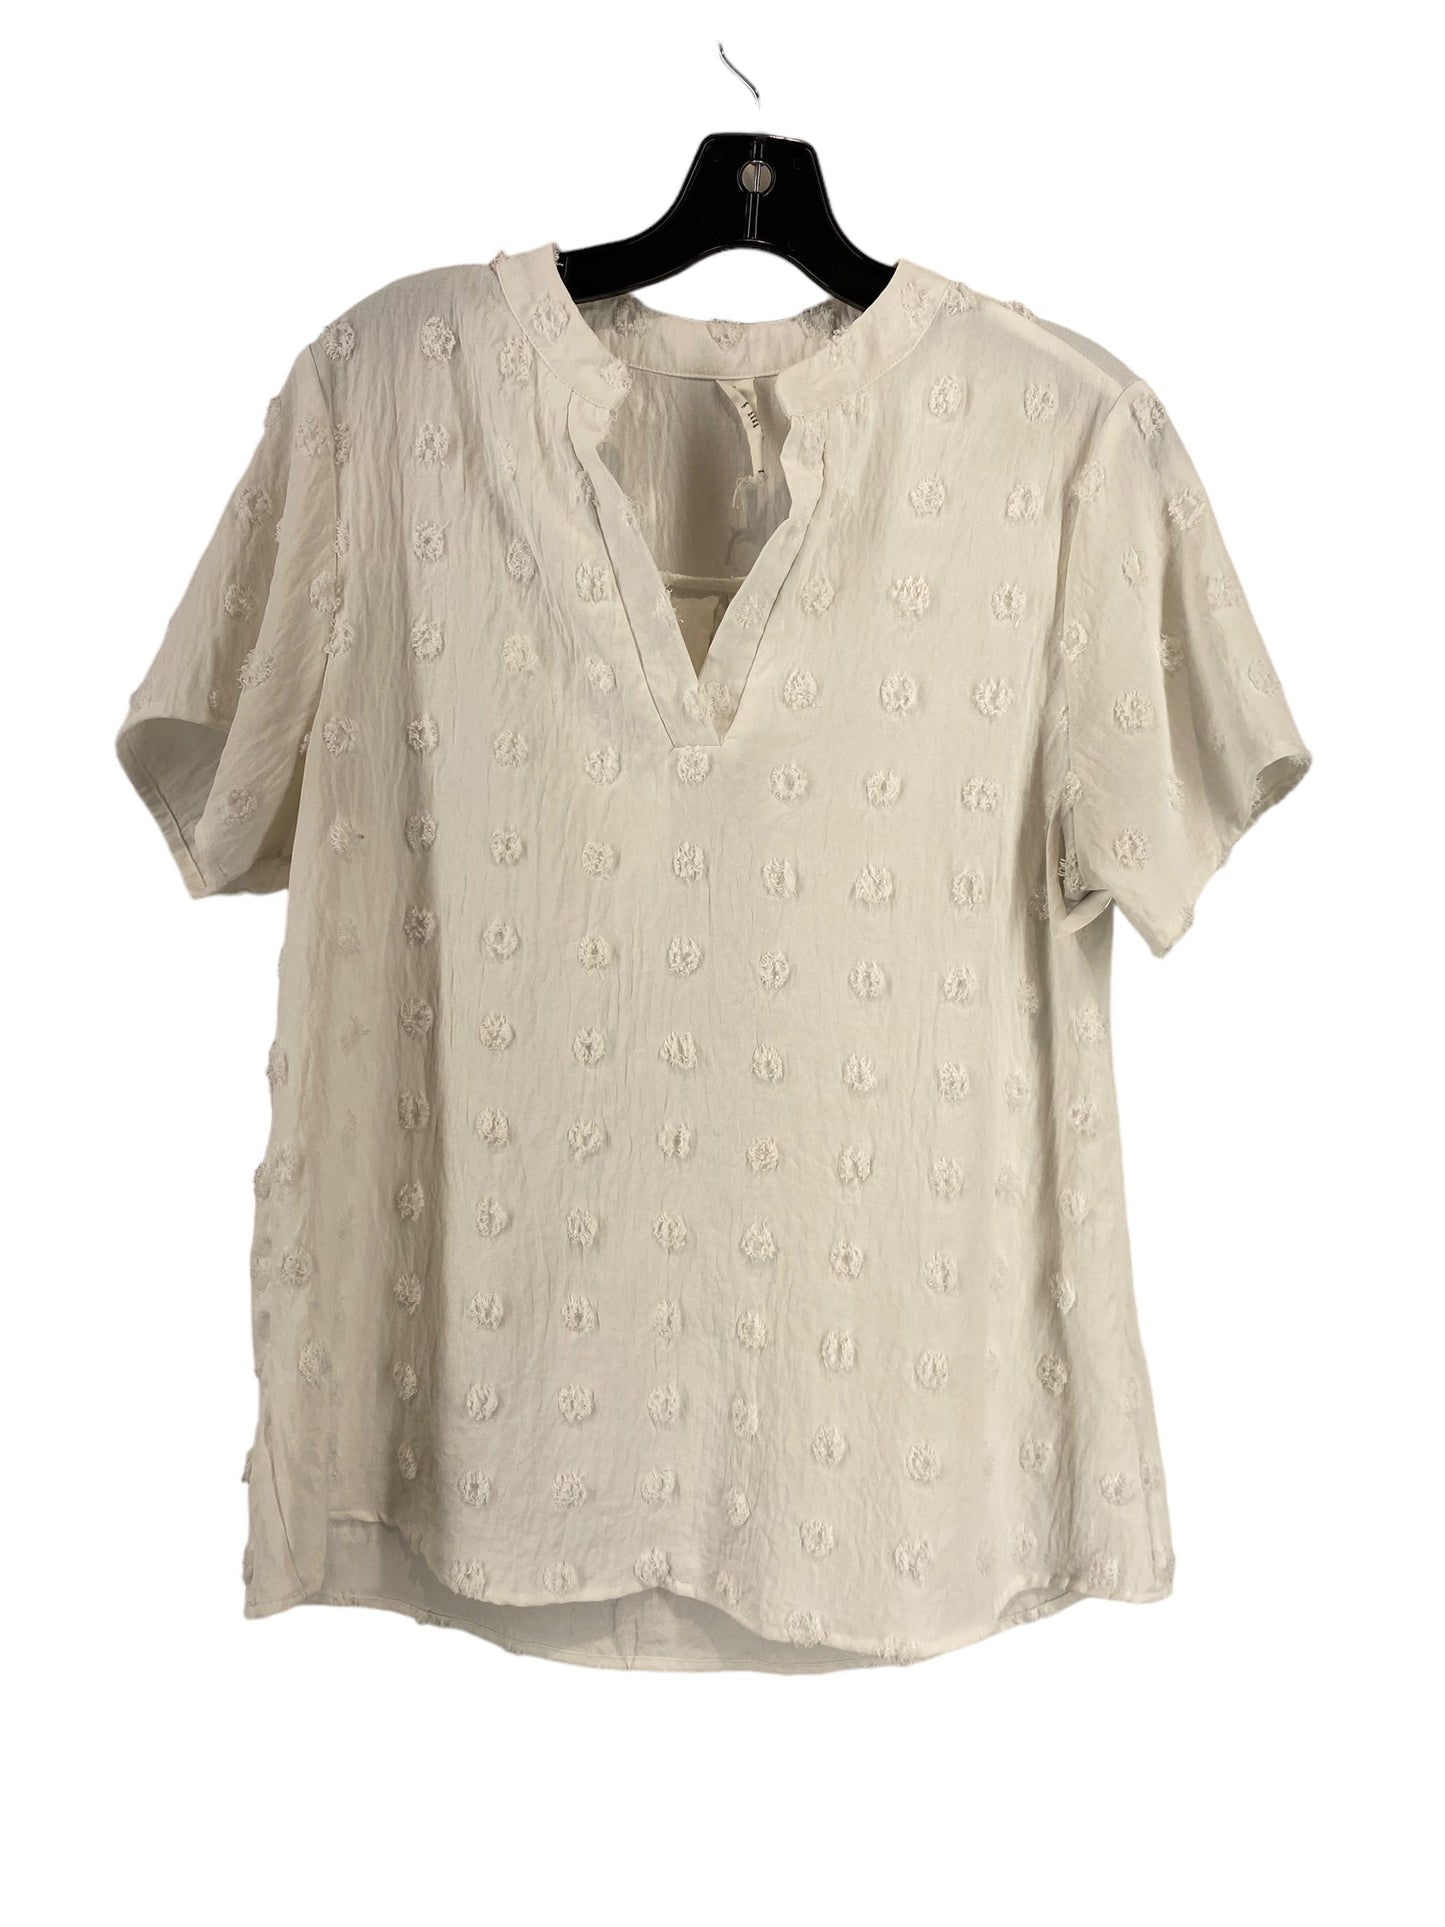 White Top Short Sleeve Clothes Mentor, Size L